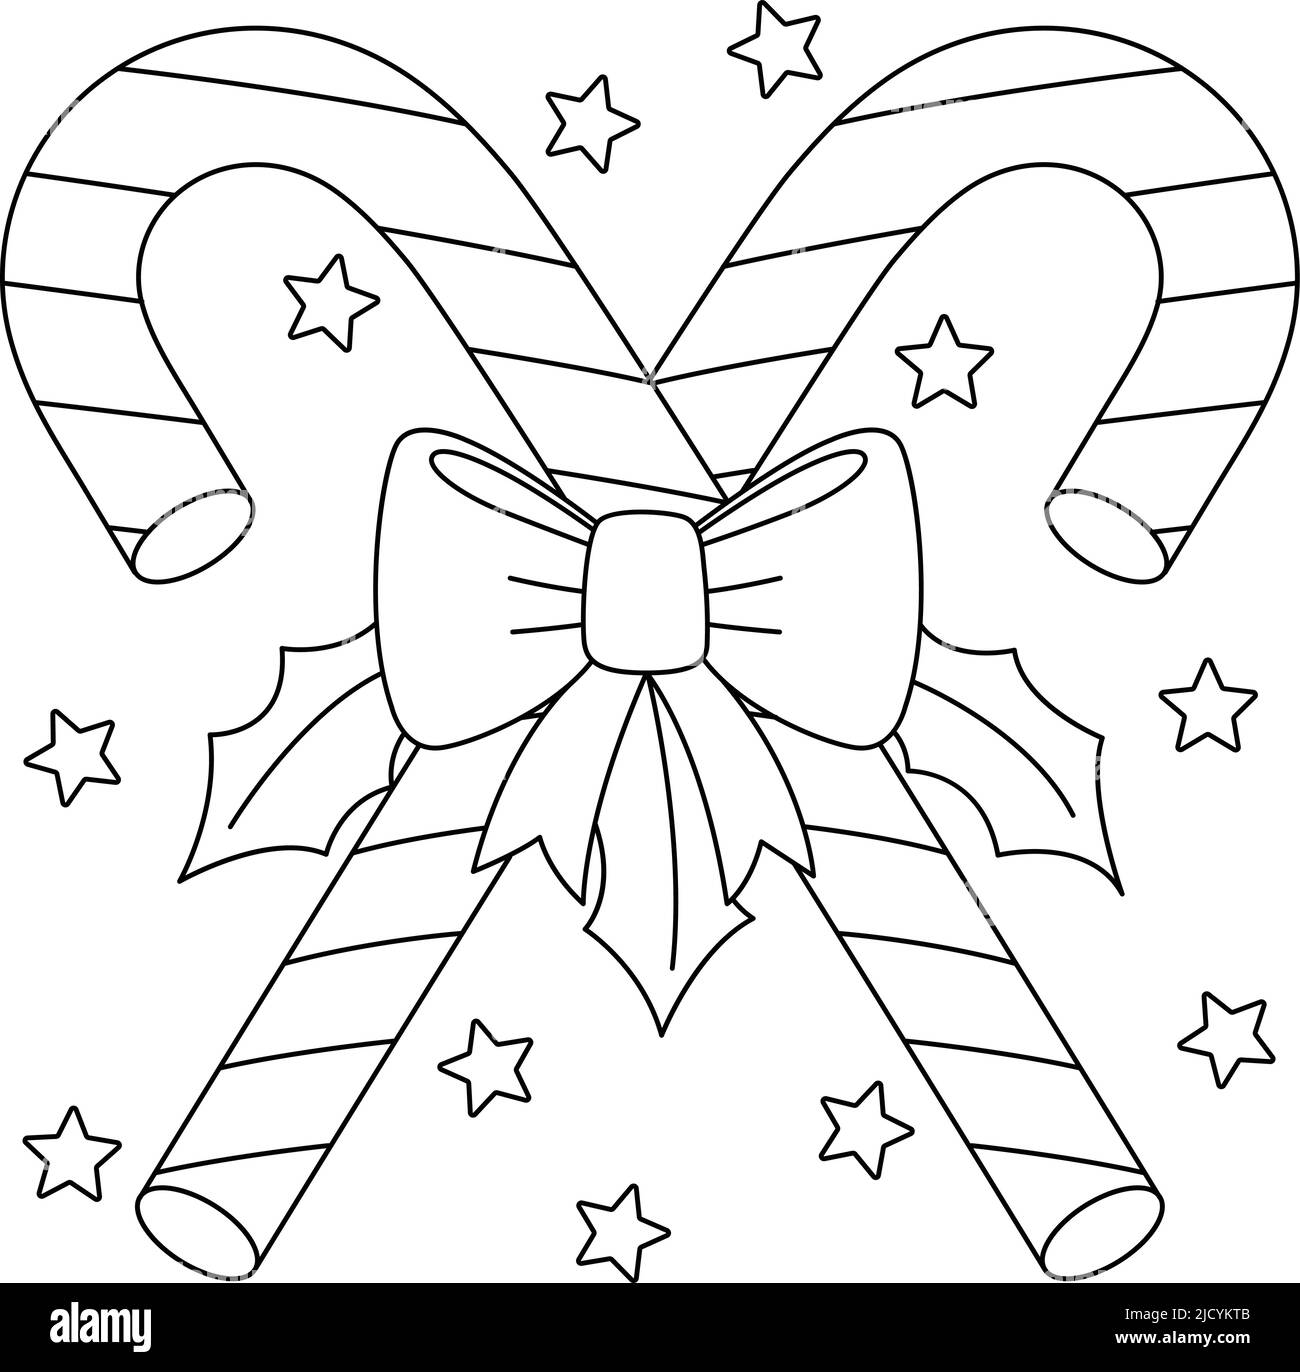 Christmas Candy Cane Coloring Page for Kids Stock Vector